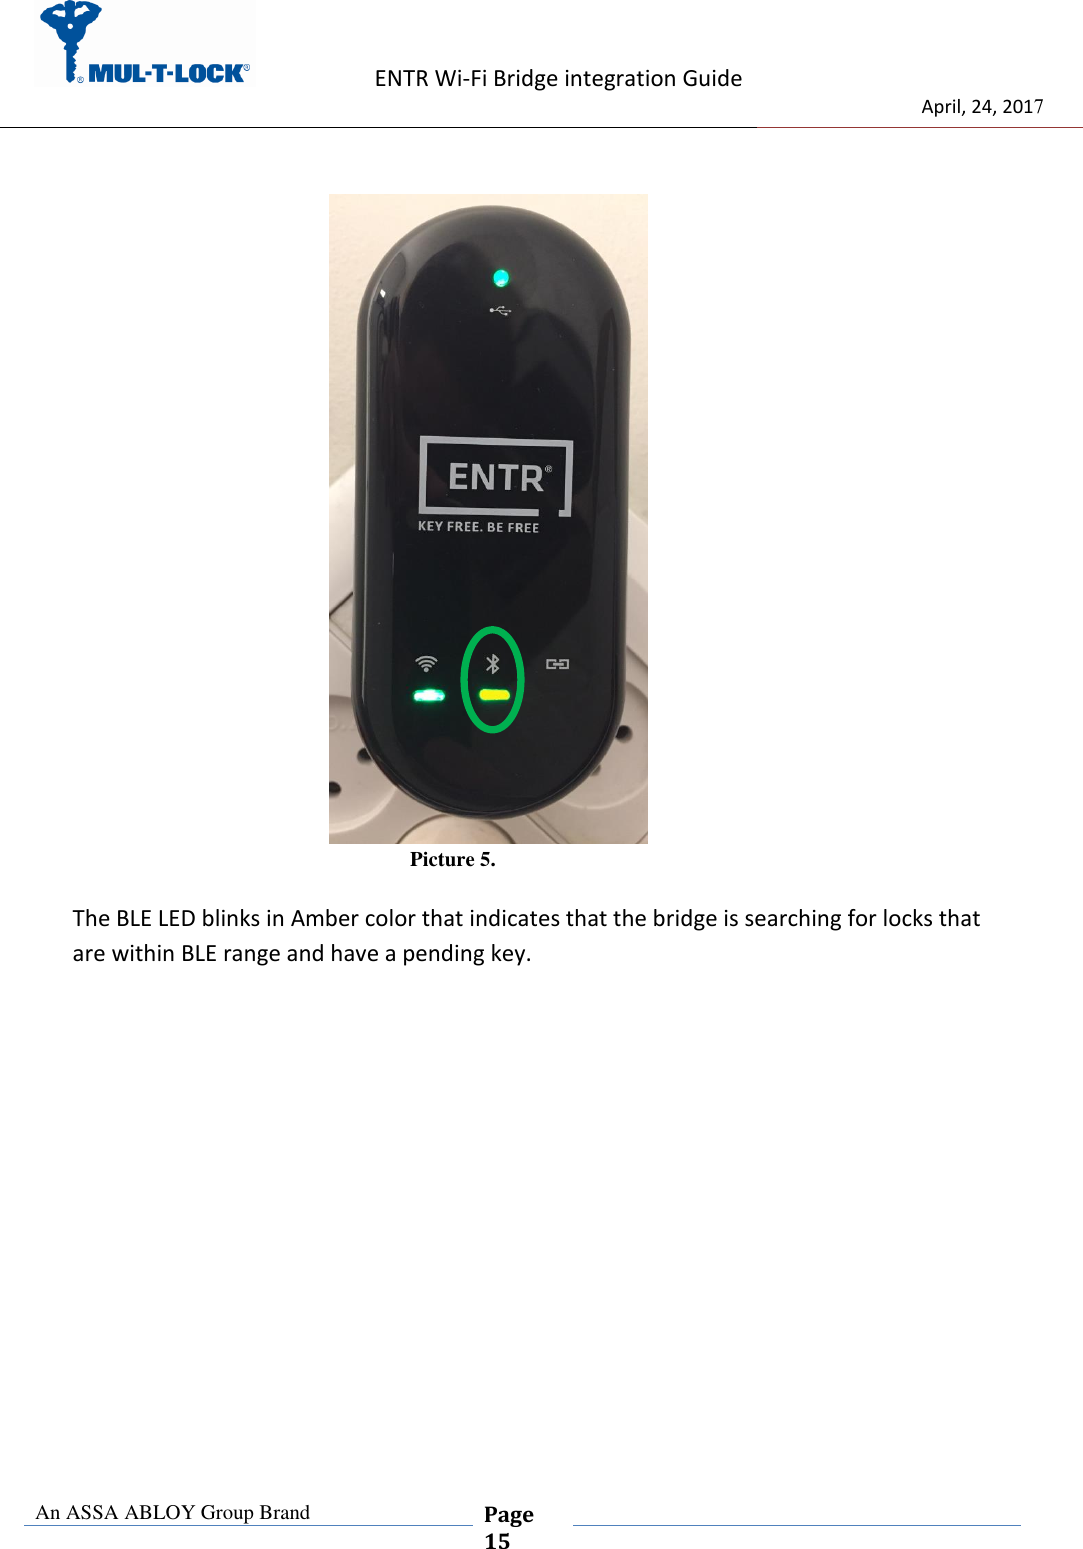                    ENTR Wi-Fi Bridge integration Guide                                  April, 24, 2017  An ASSA ABLOY Group Brand  Page 15                               Picture 5.  The BLE LED blinks in Amber color that indicates that the bridge is searching for locks that are within BLE range and have a pending key.  